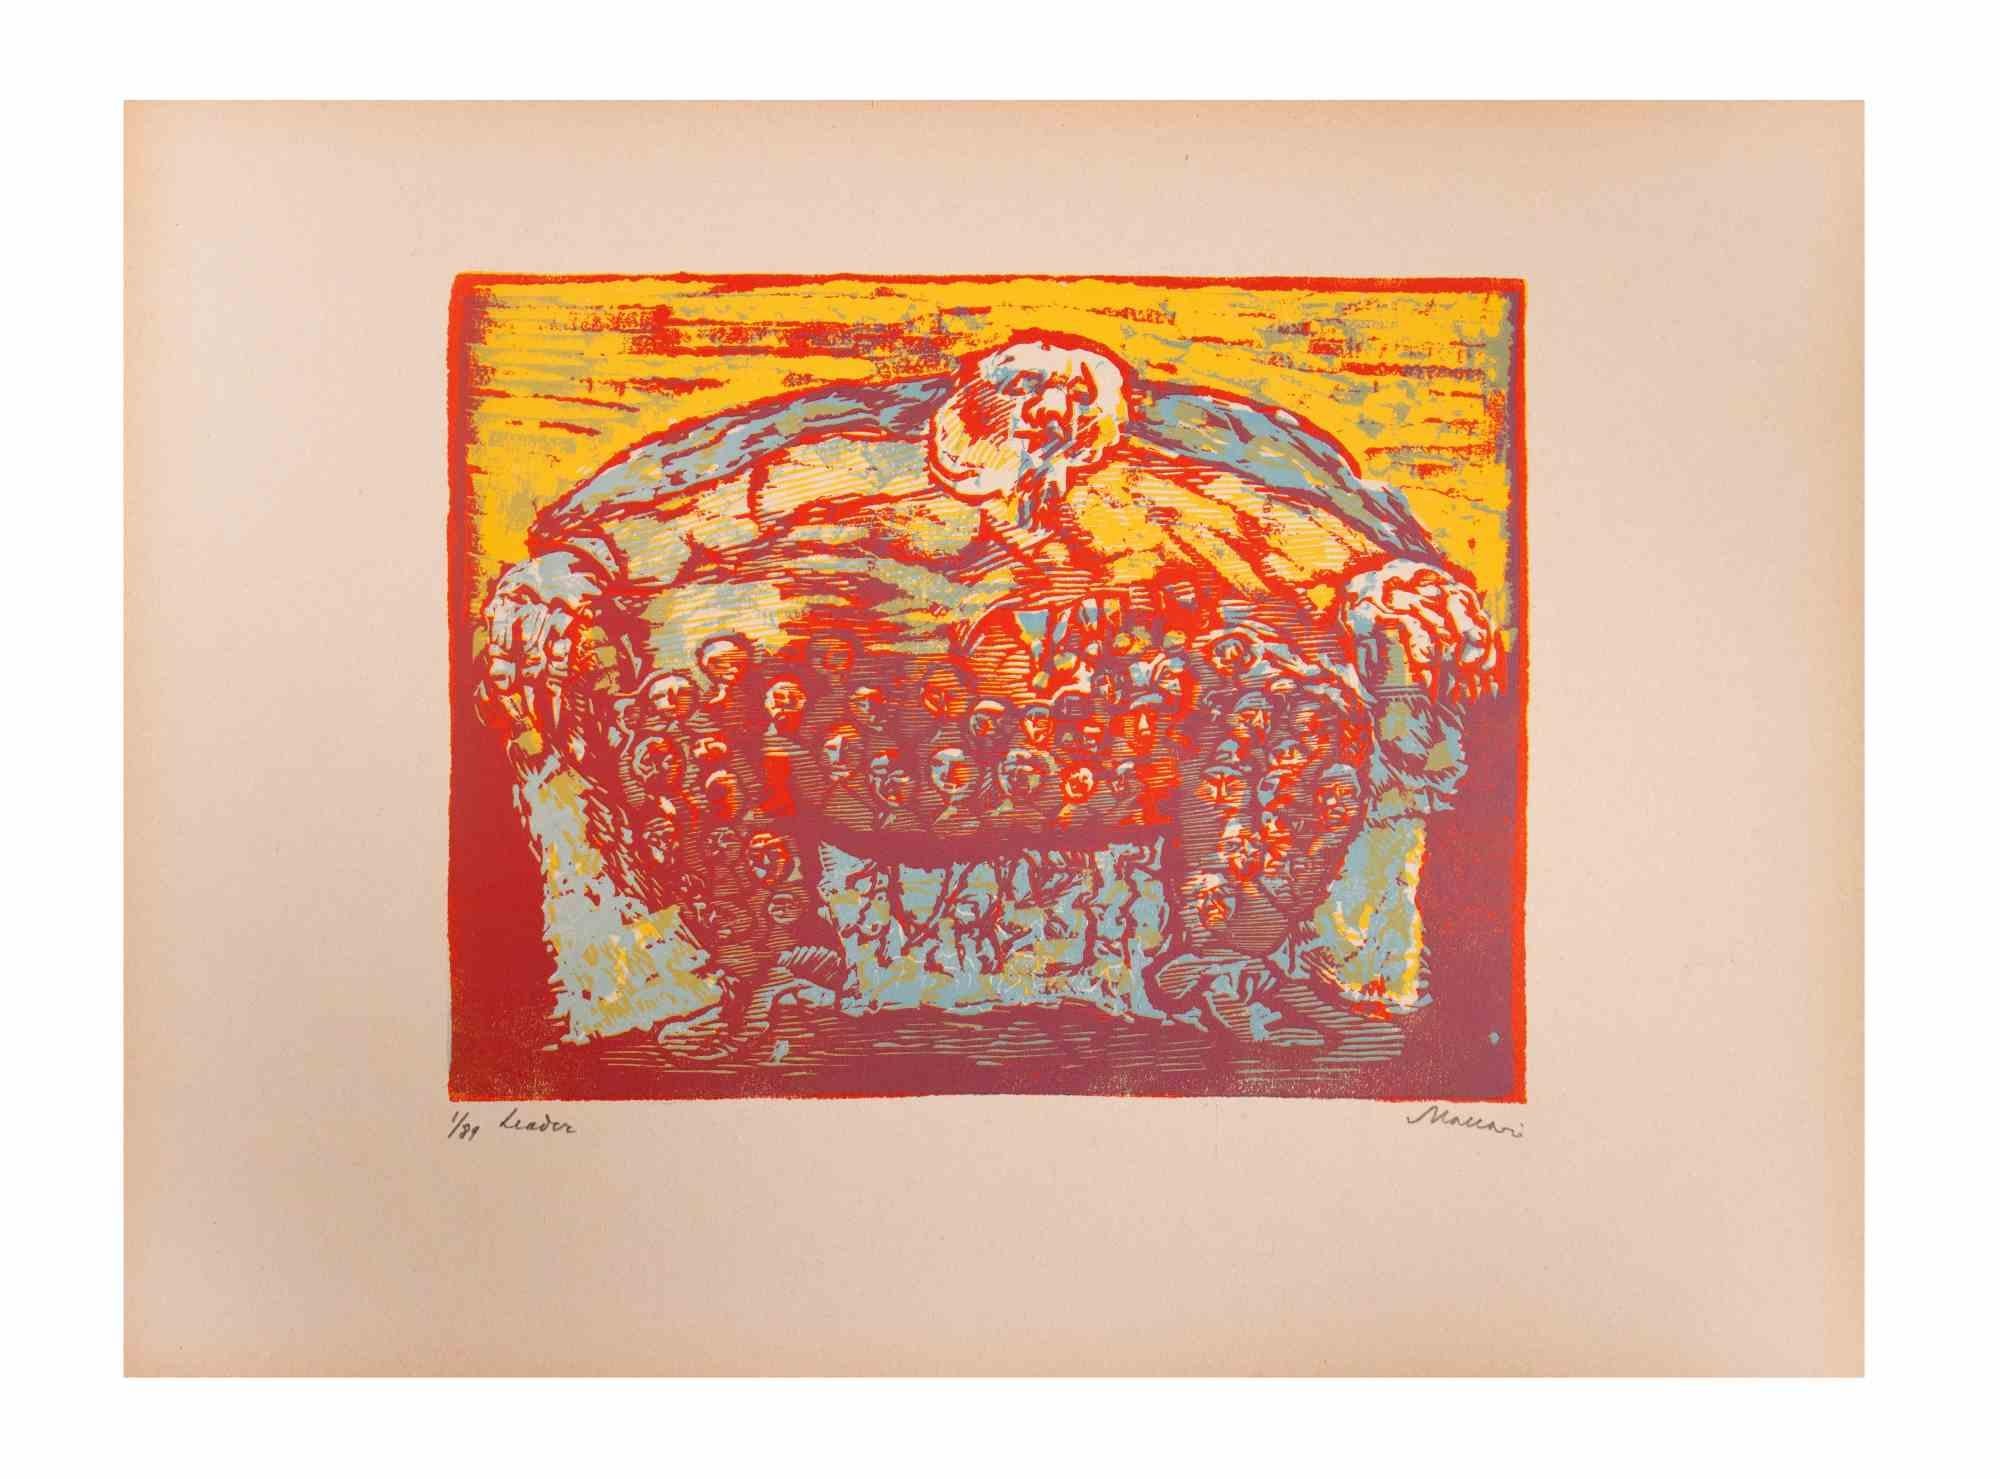 Leader is an Artwork realized by Mino Maccari  (1924-1989) in the Mid-20th Century.

Colored woodcut on paper. Hand-signed on the lower, numbered 1/89 specimens and titled on the left margin.

Good conditions.

Mino Maccari (Siena, 1924-Rome, June